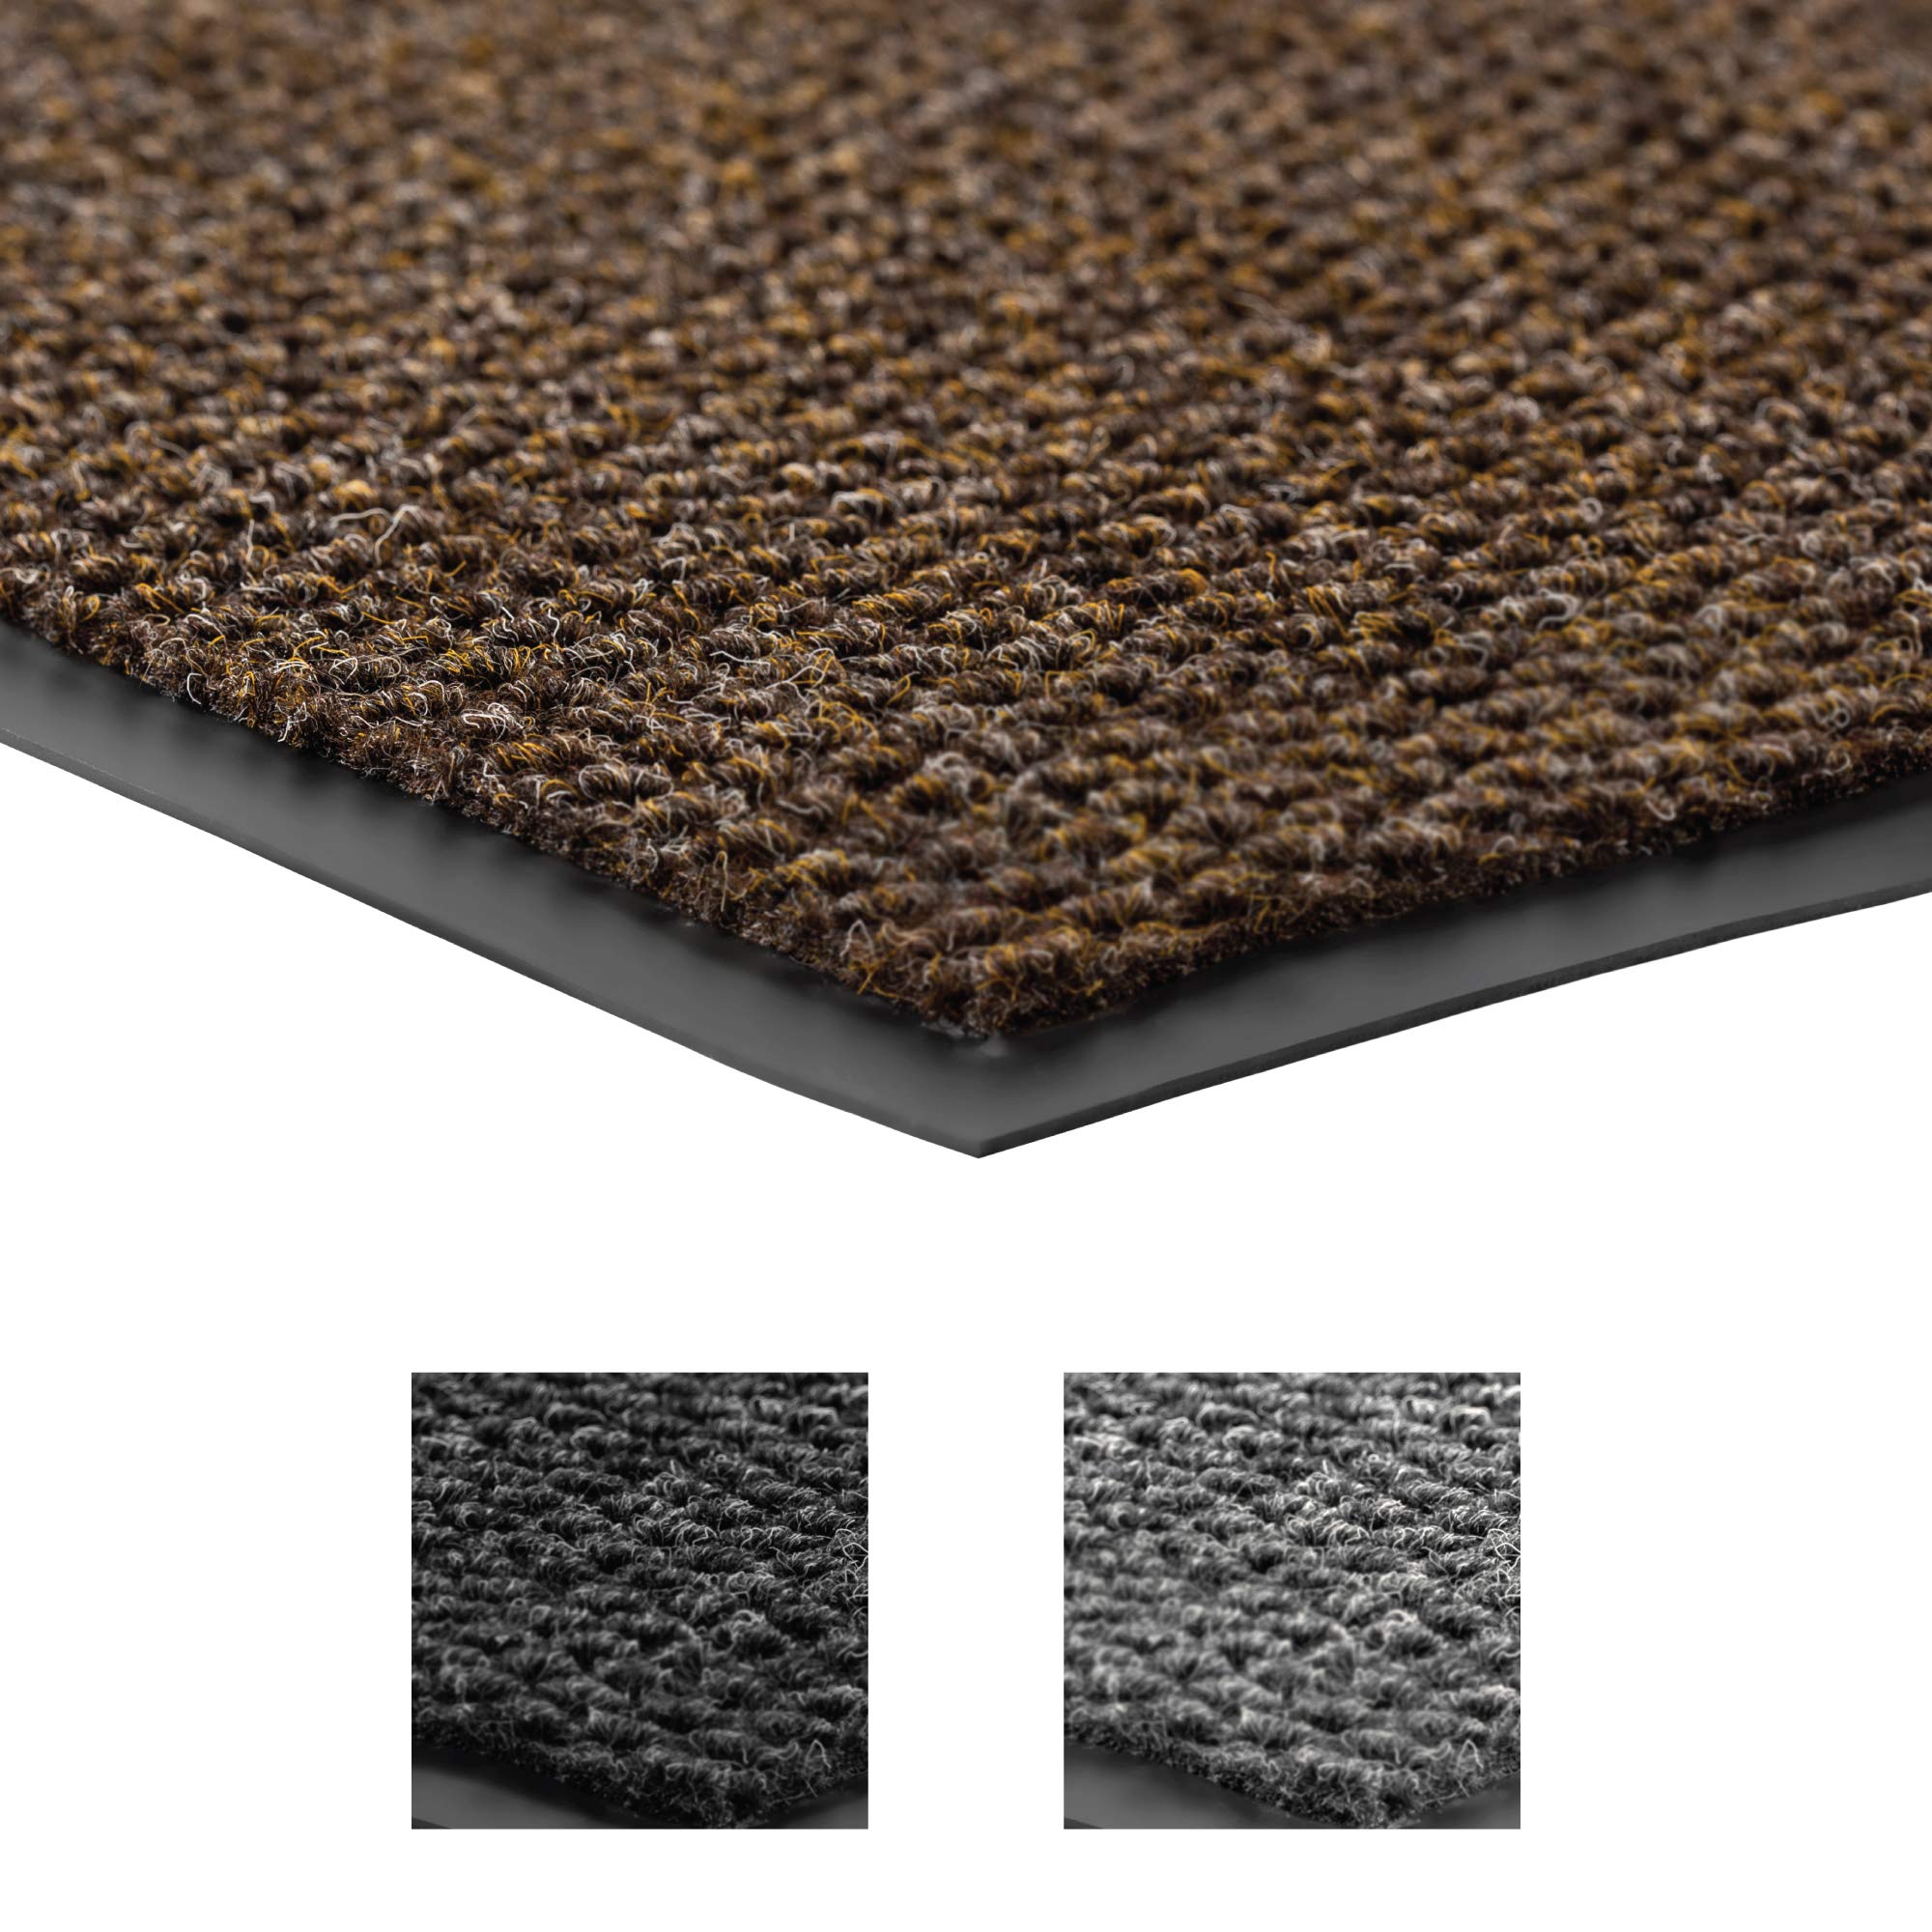 Notrax - 136S0046Br 136 Polynib Entrance Mat, For Home Or Office, 4 X 6 Brown